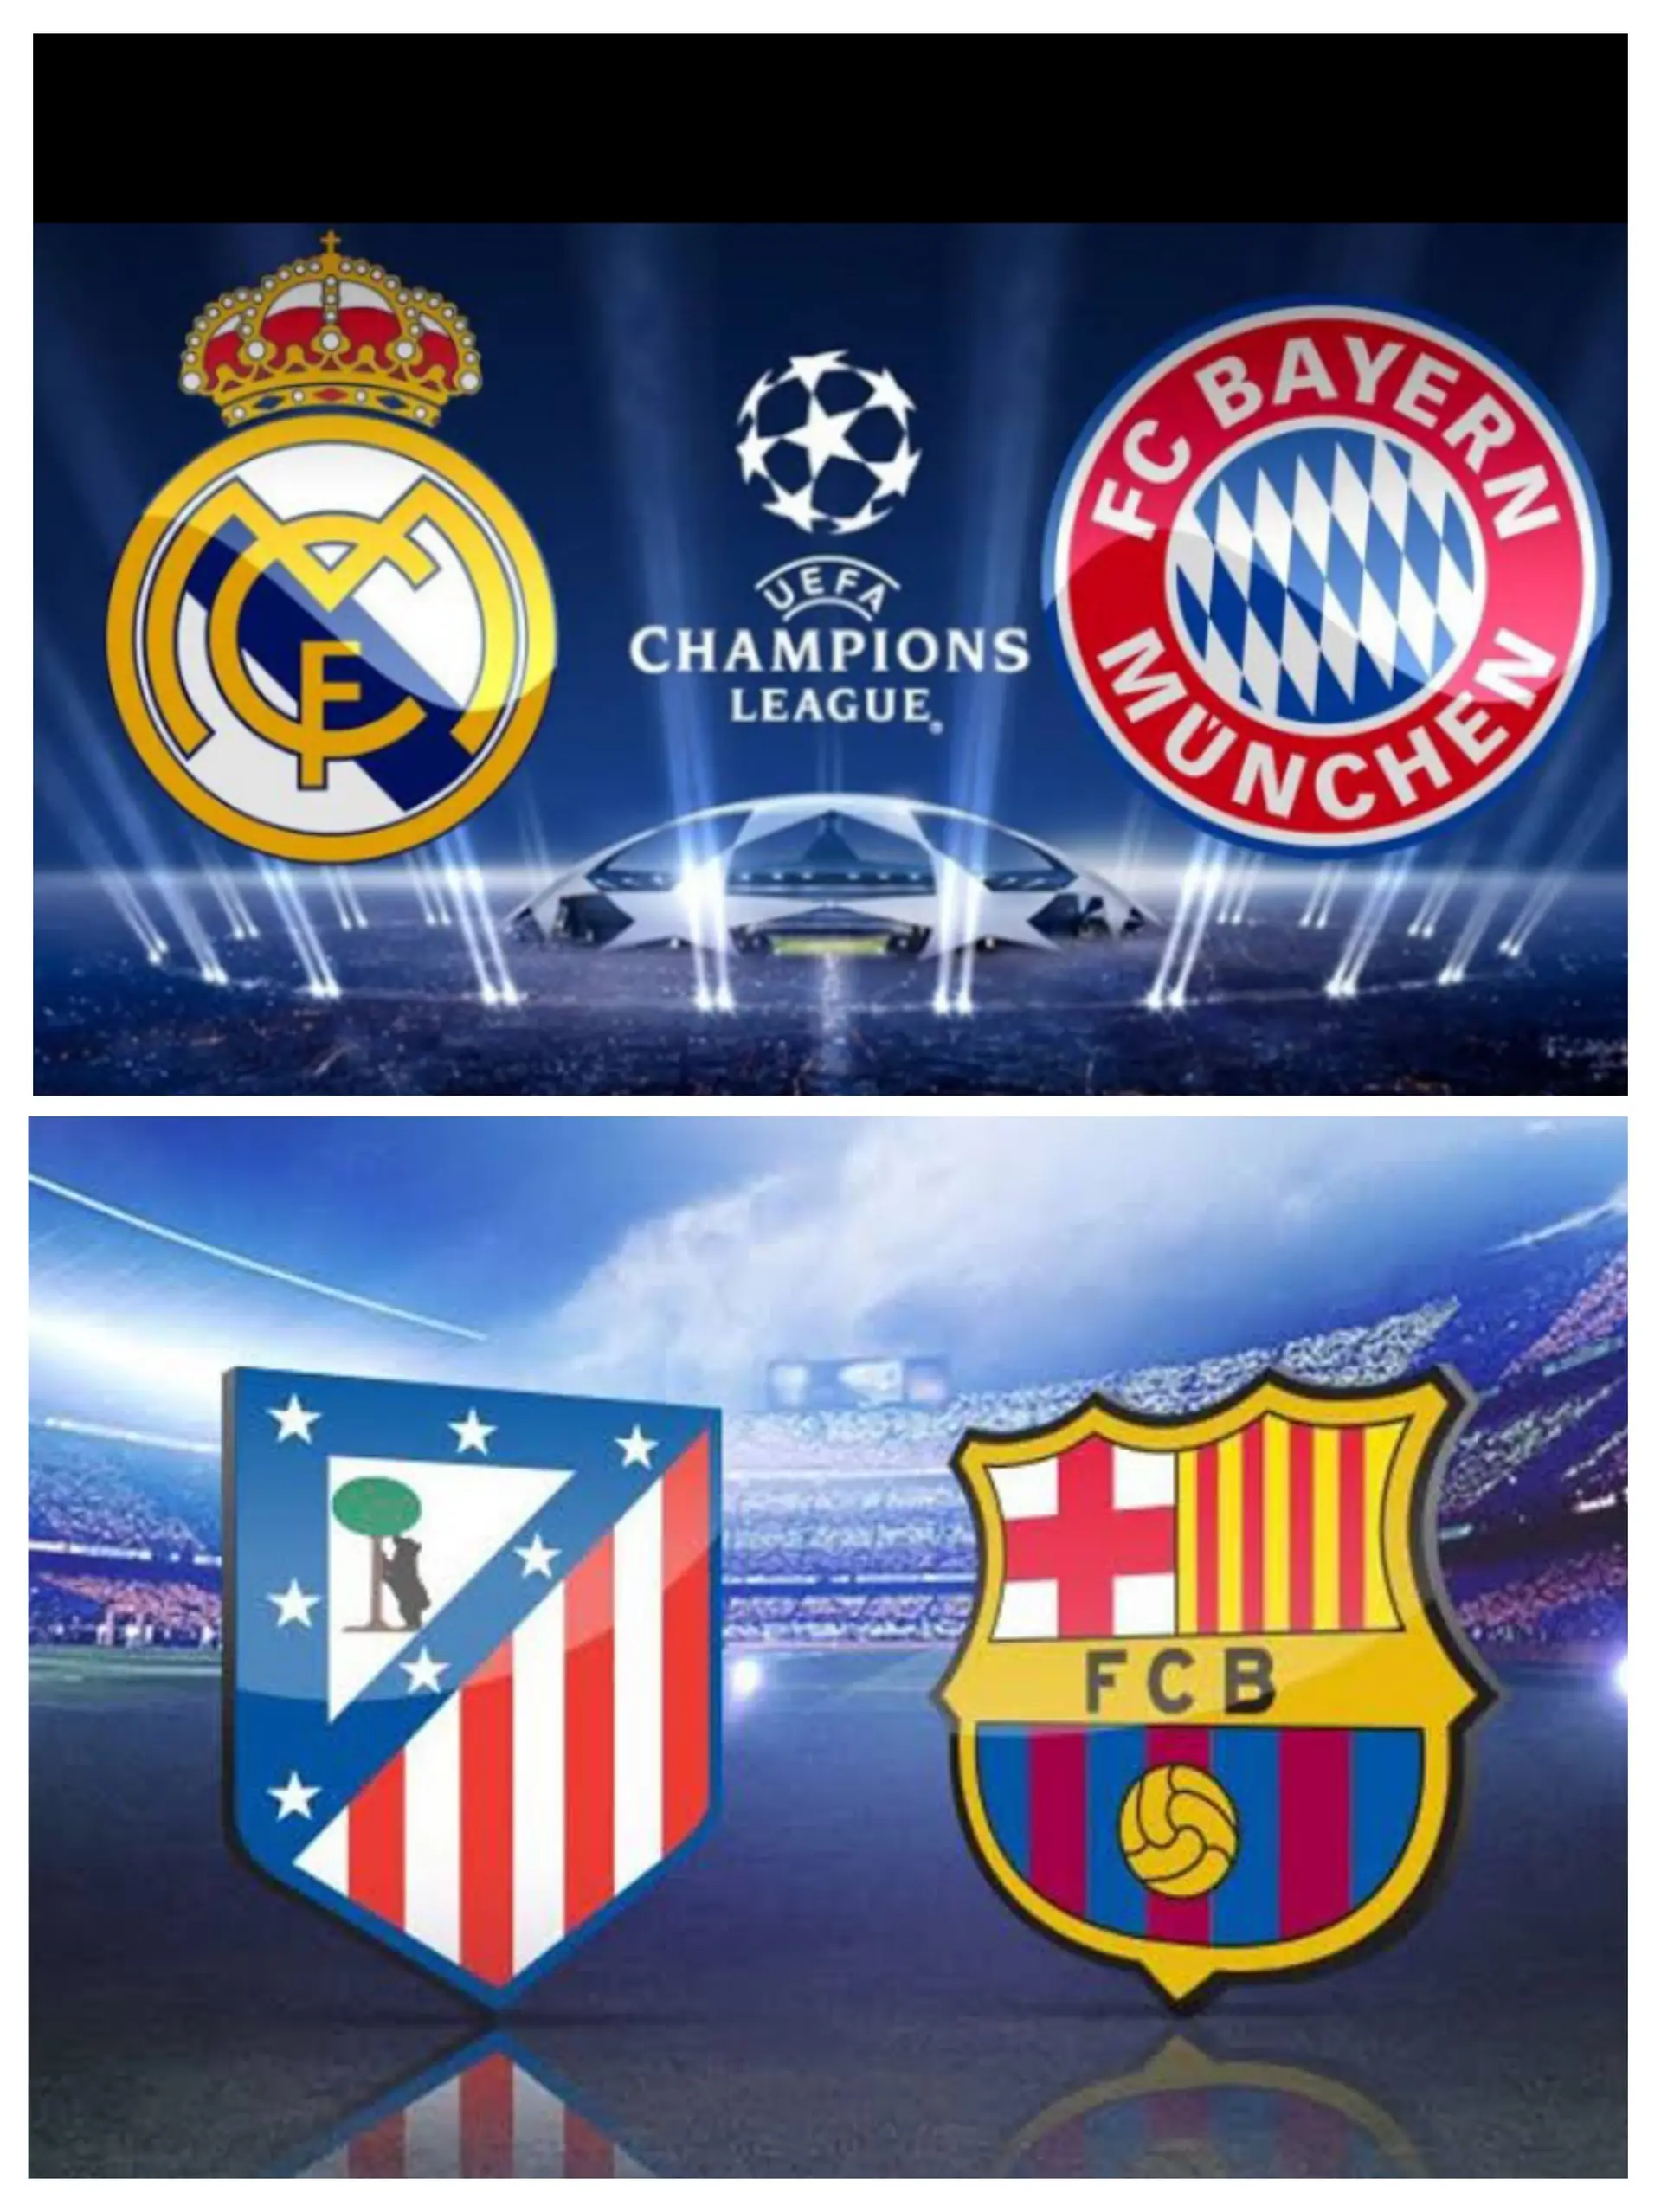 I give a chance to experienced clubs to play UCL Semi Final this season.